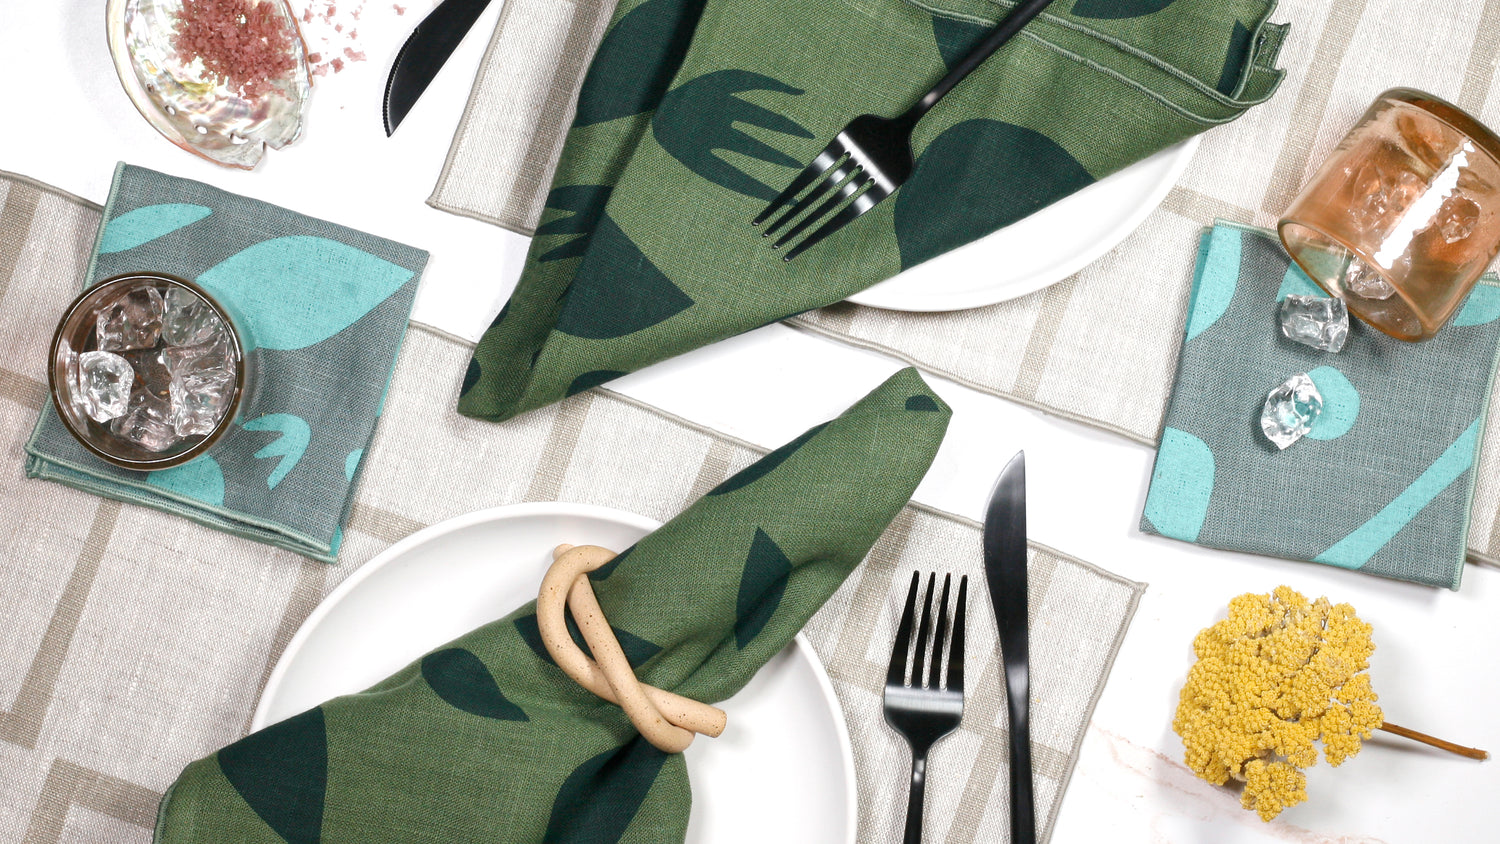 Linen Napkin For Table Decor from Thailand